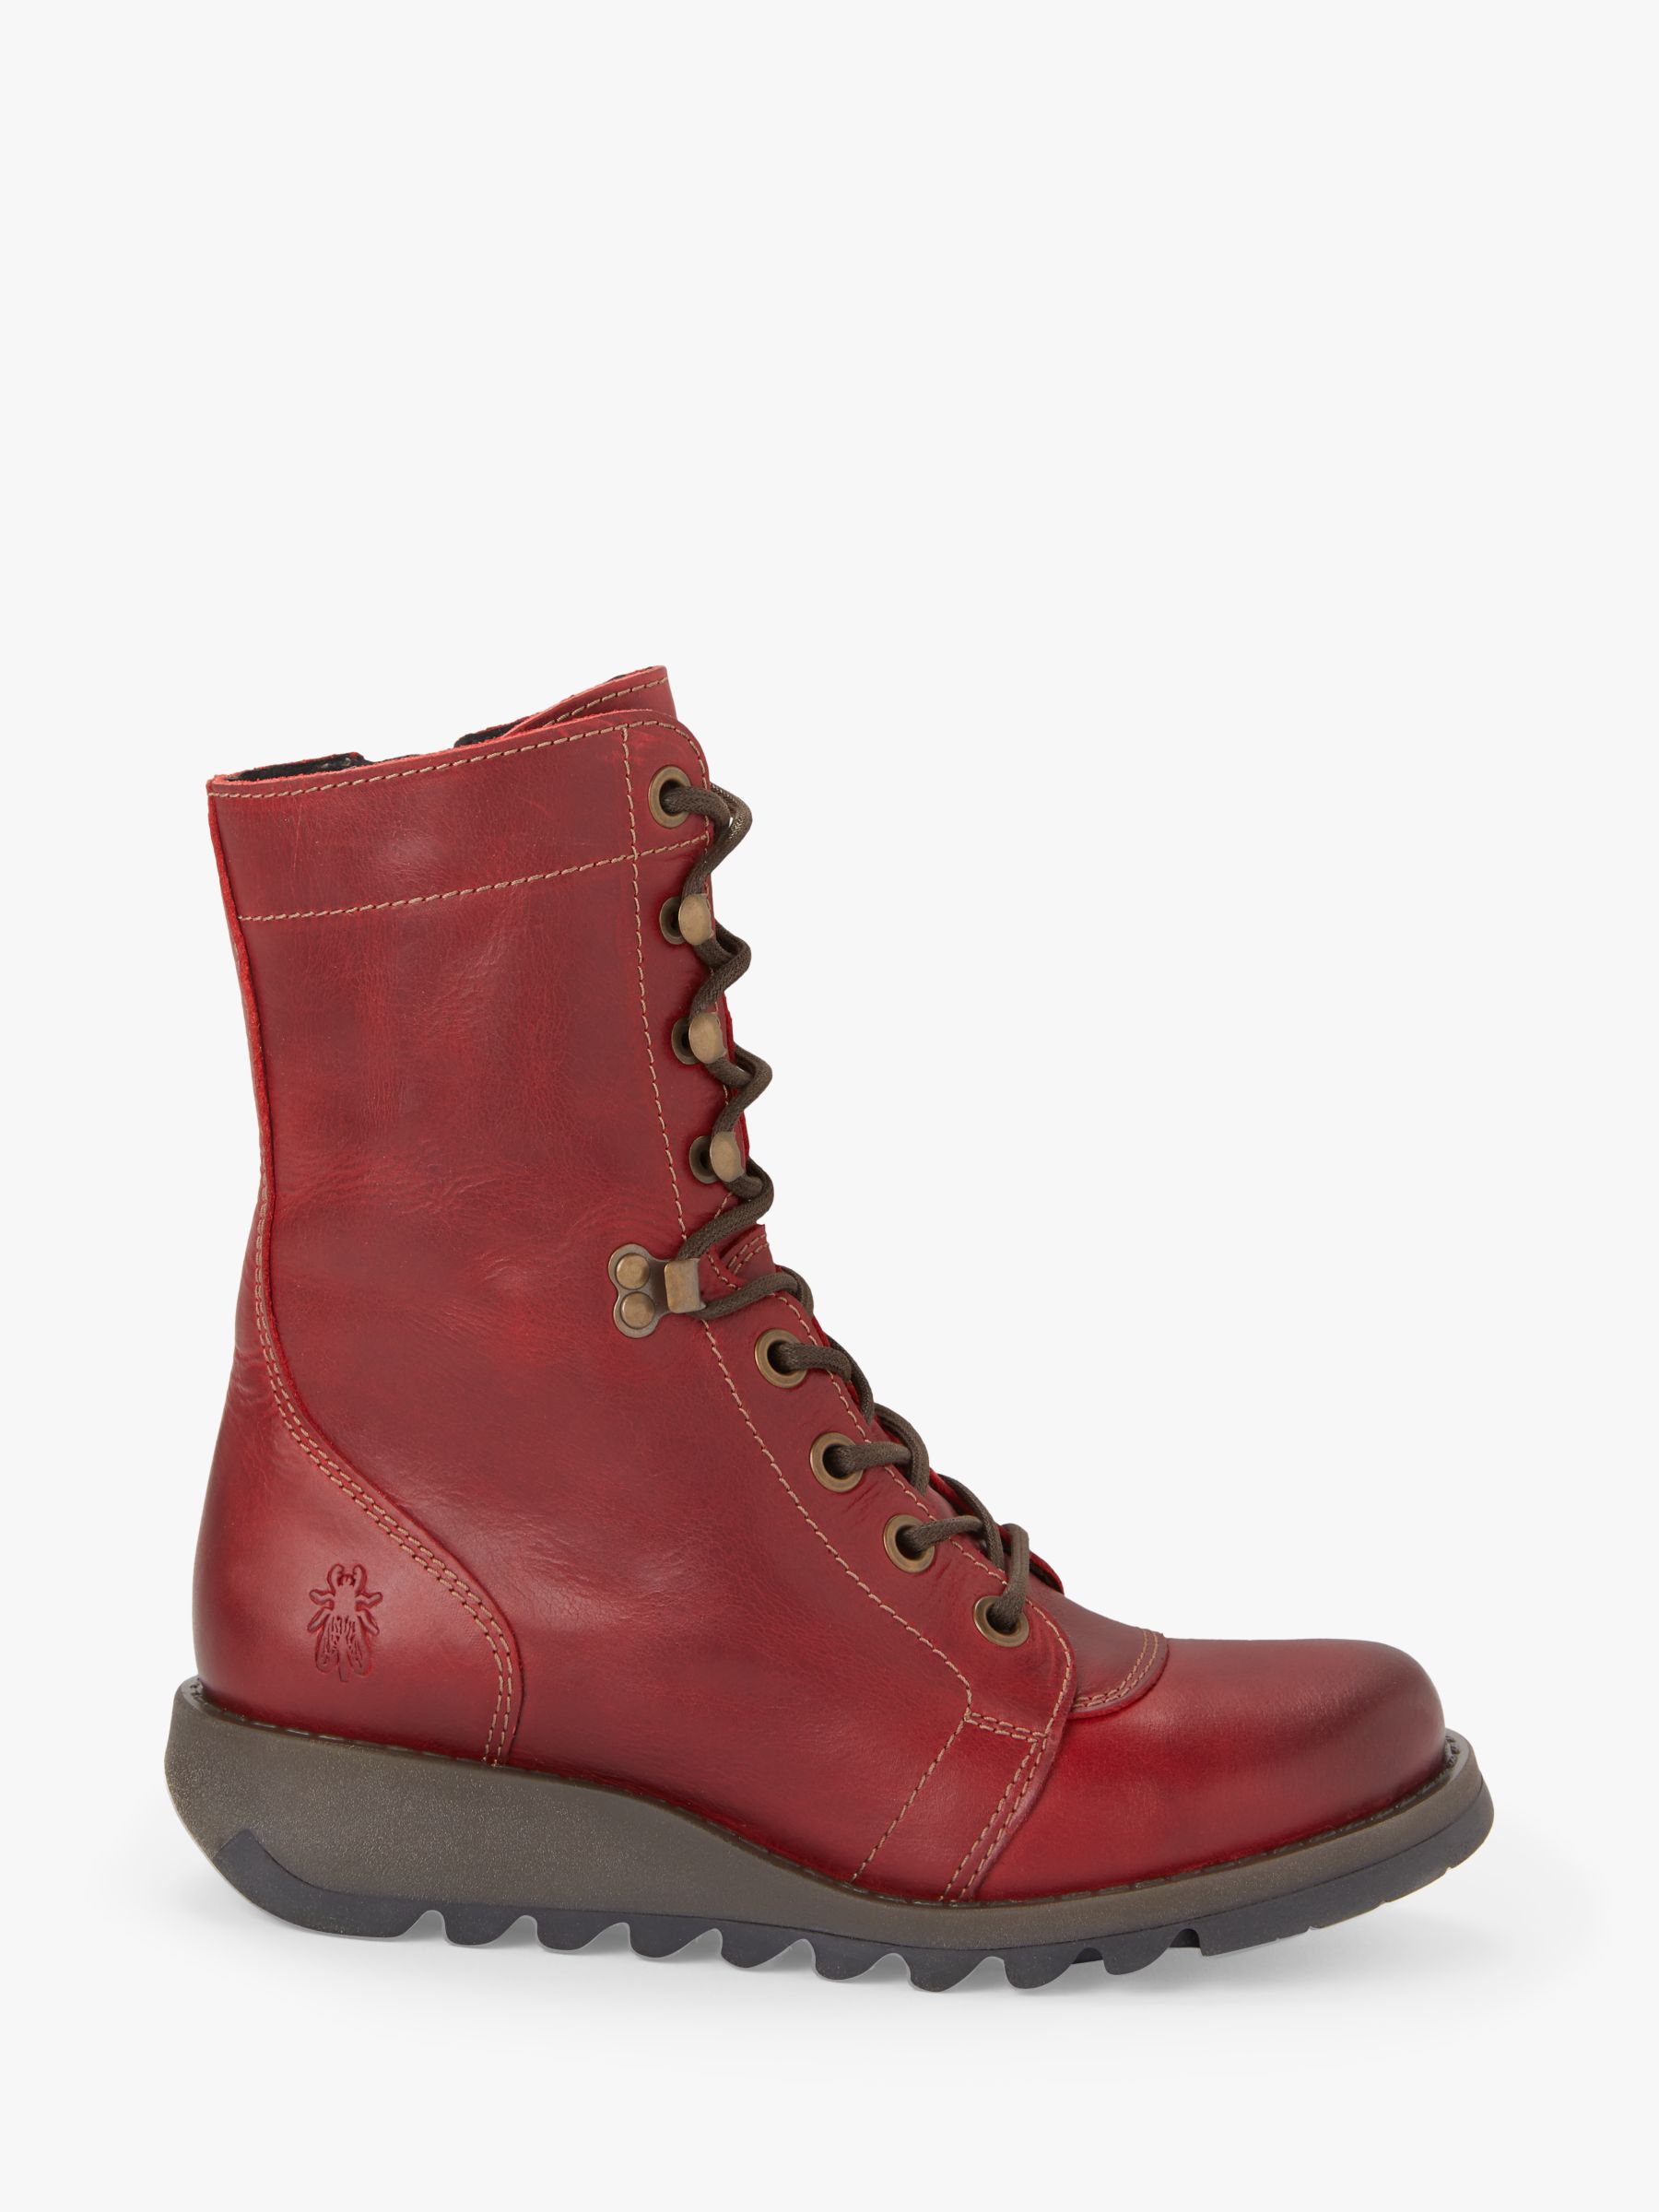 Fly London SITE360Fly Lace Up Ankle Boots, Red Leather at John Lewis ...